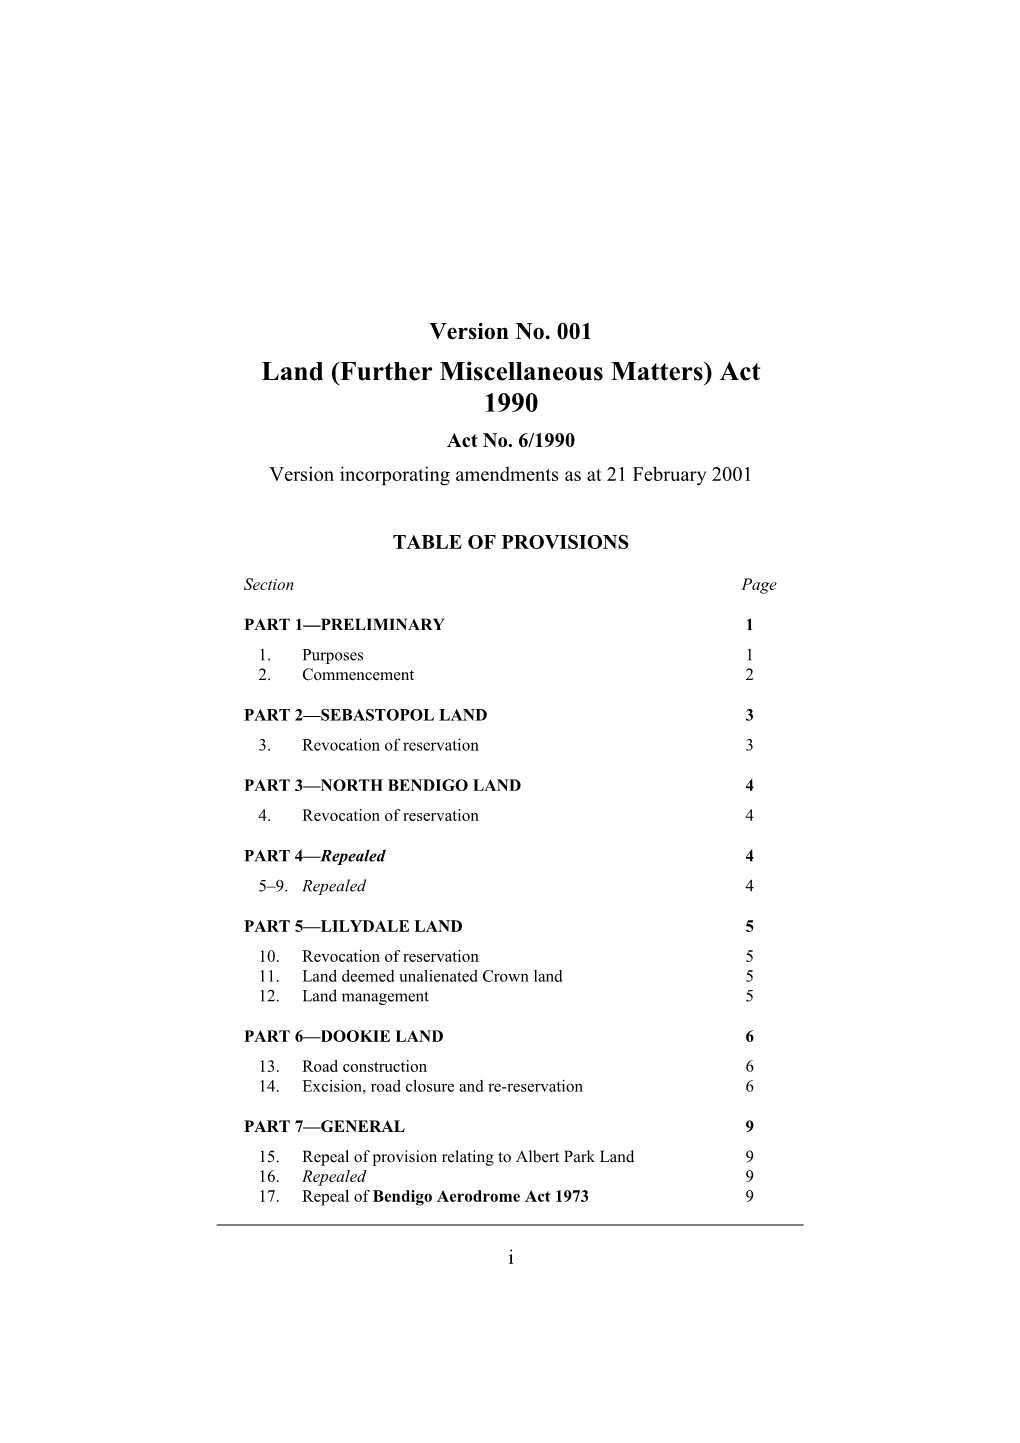 Land (Further Miscellaneous Matters) Act 1990